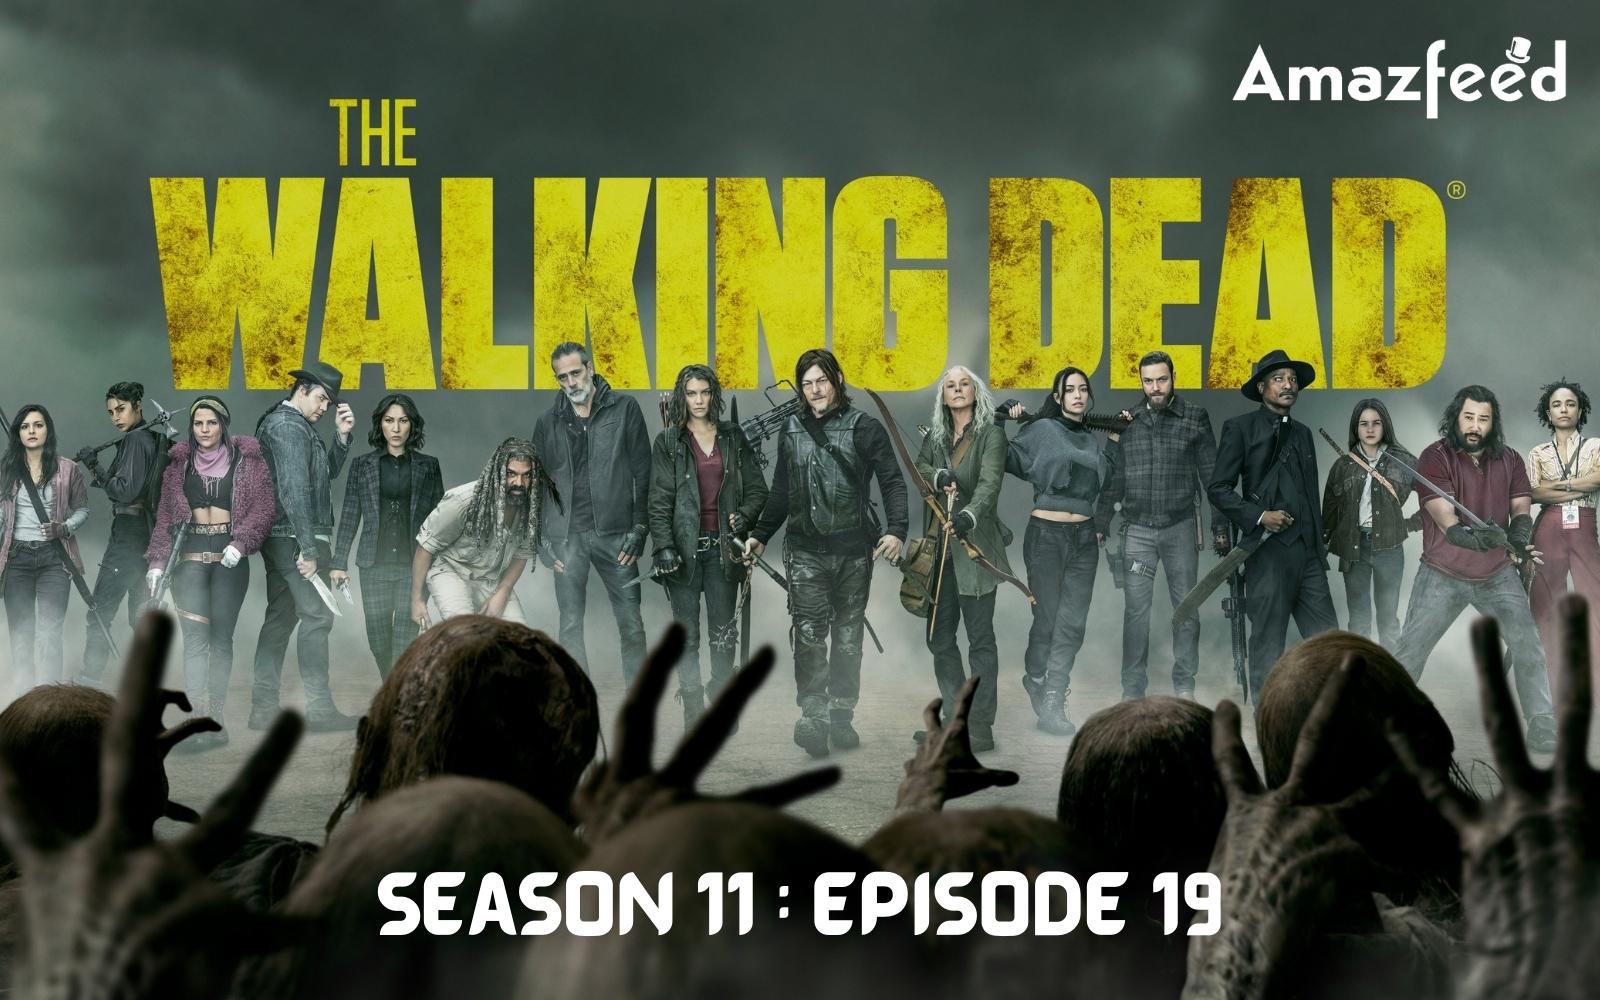 The Walking Dead Season 11 Episode 19 : Preview, Where to Watch, Speculation, Countdown & Trailer